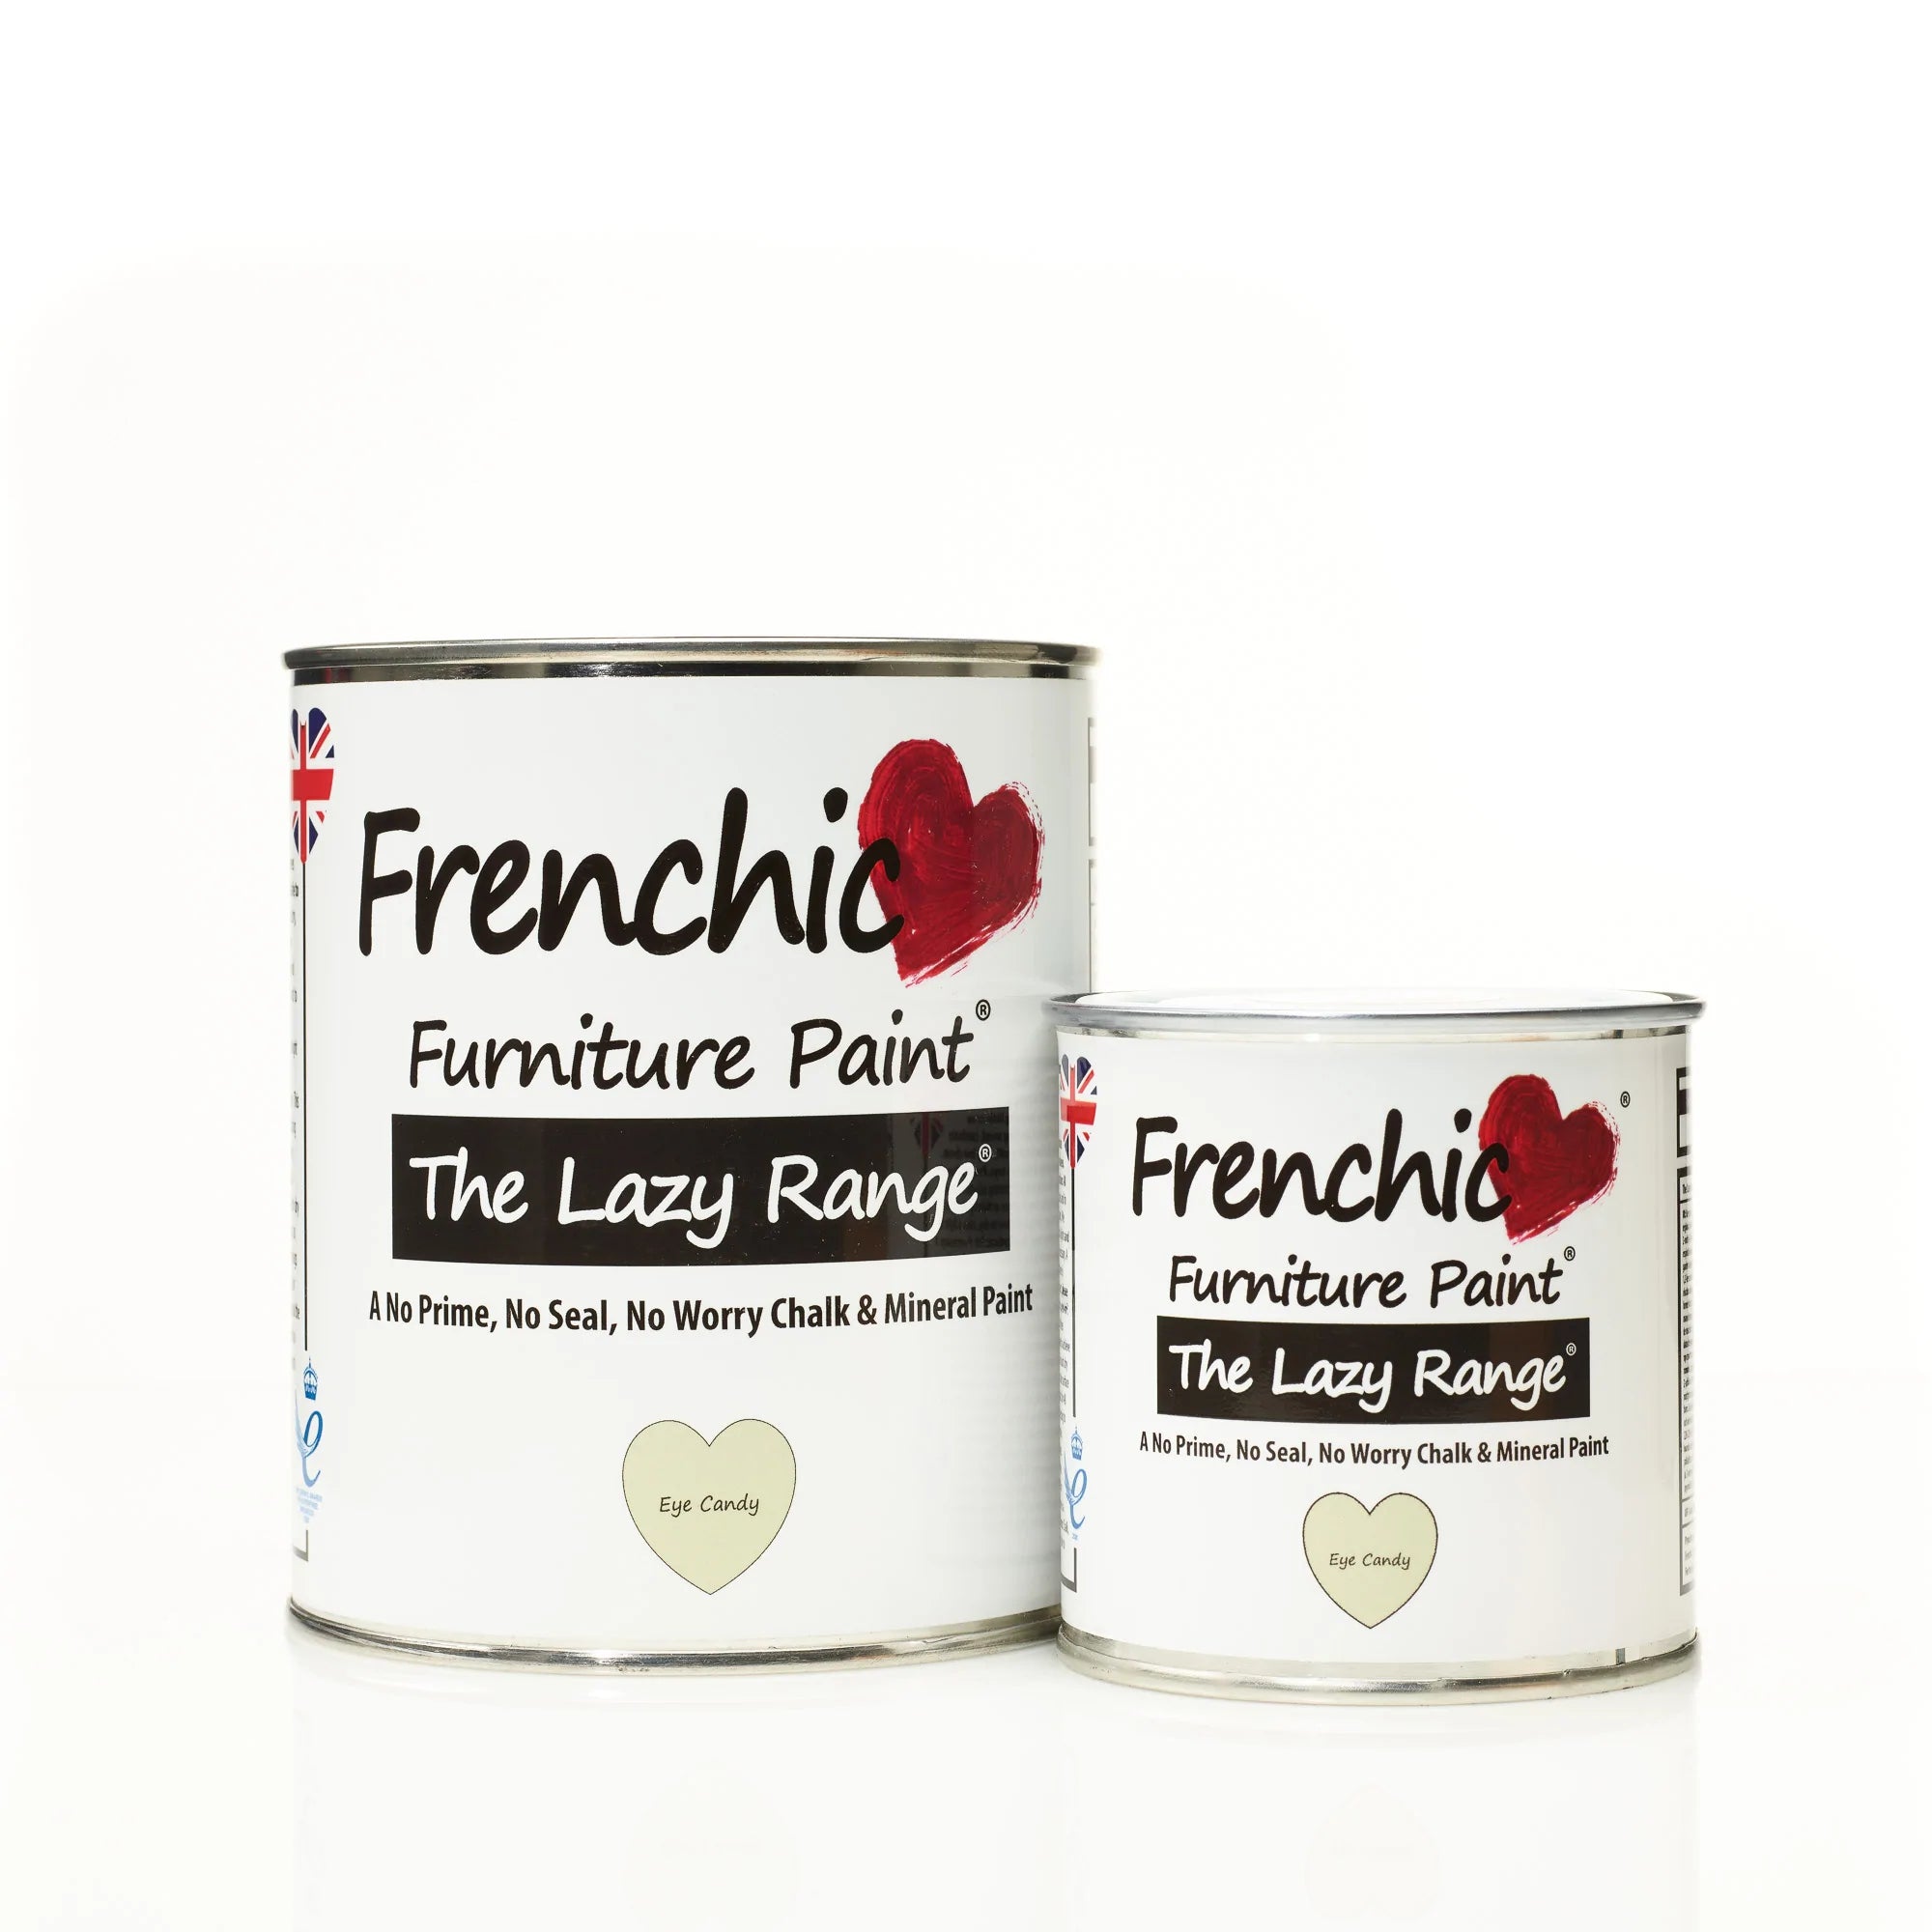 Frenchic Paint | Lazy Range - Eye Candy by Weirs of Baggot St